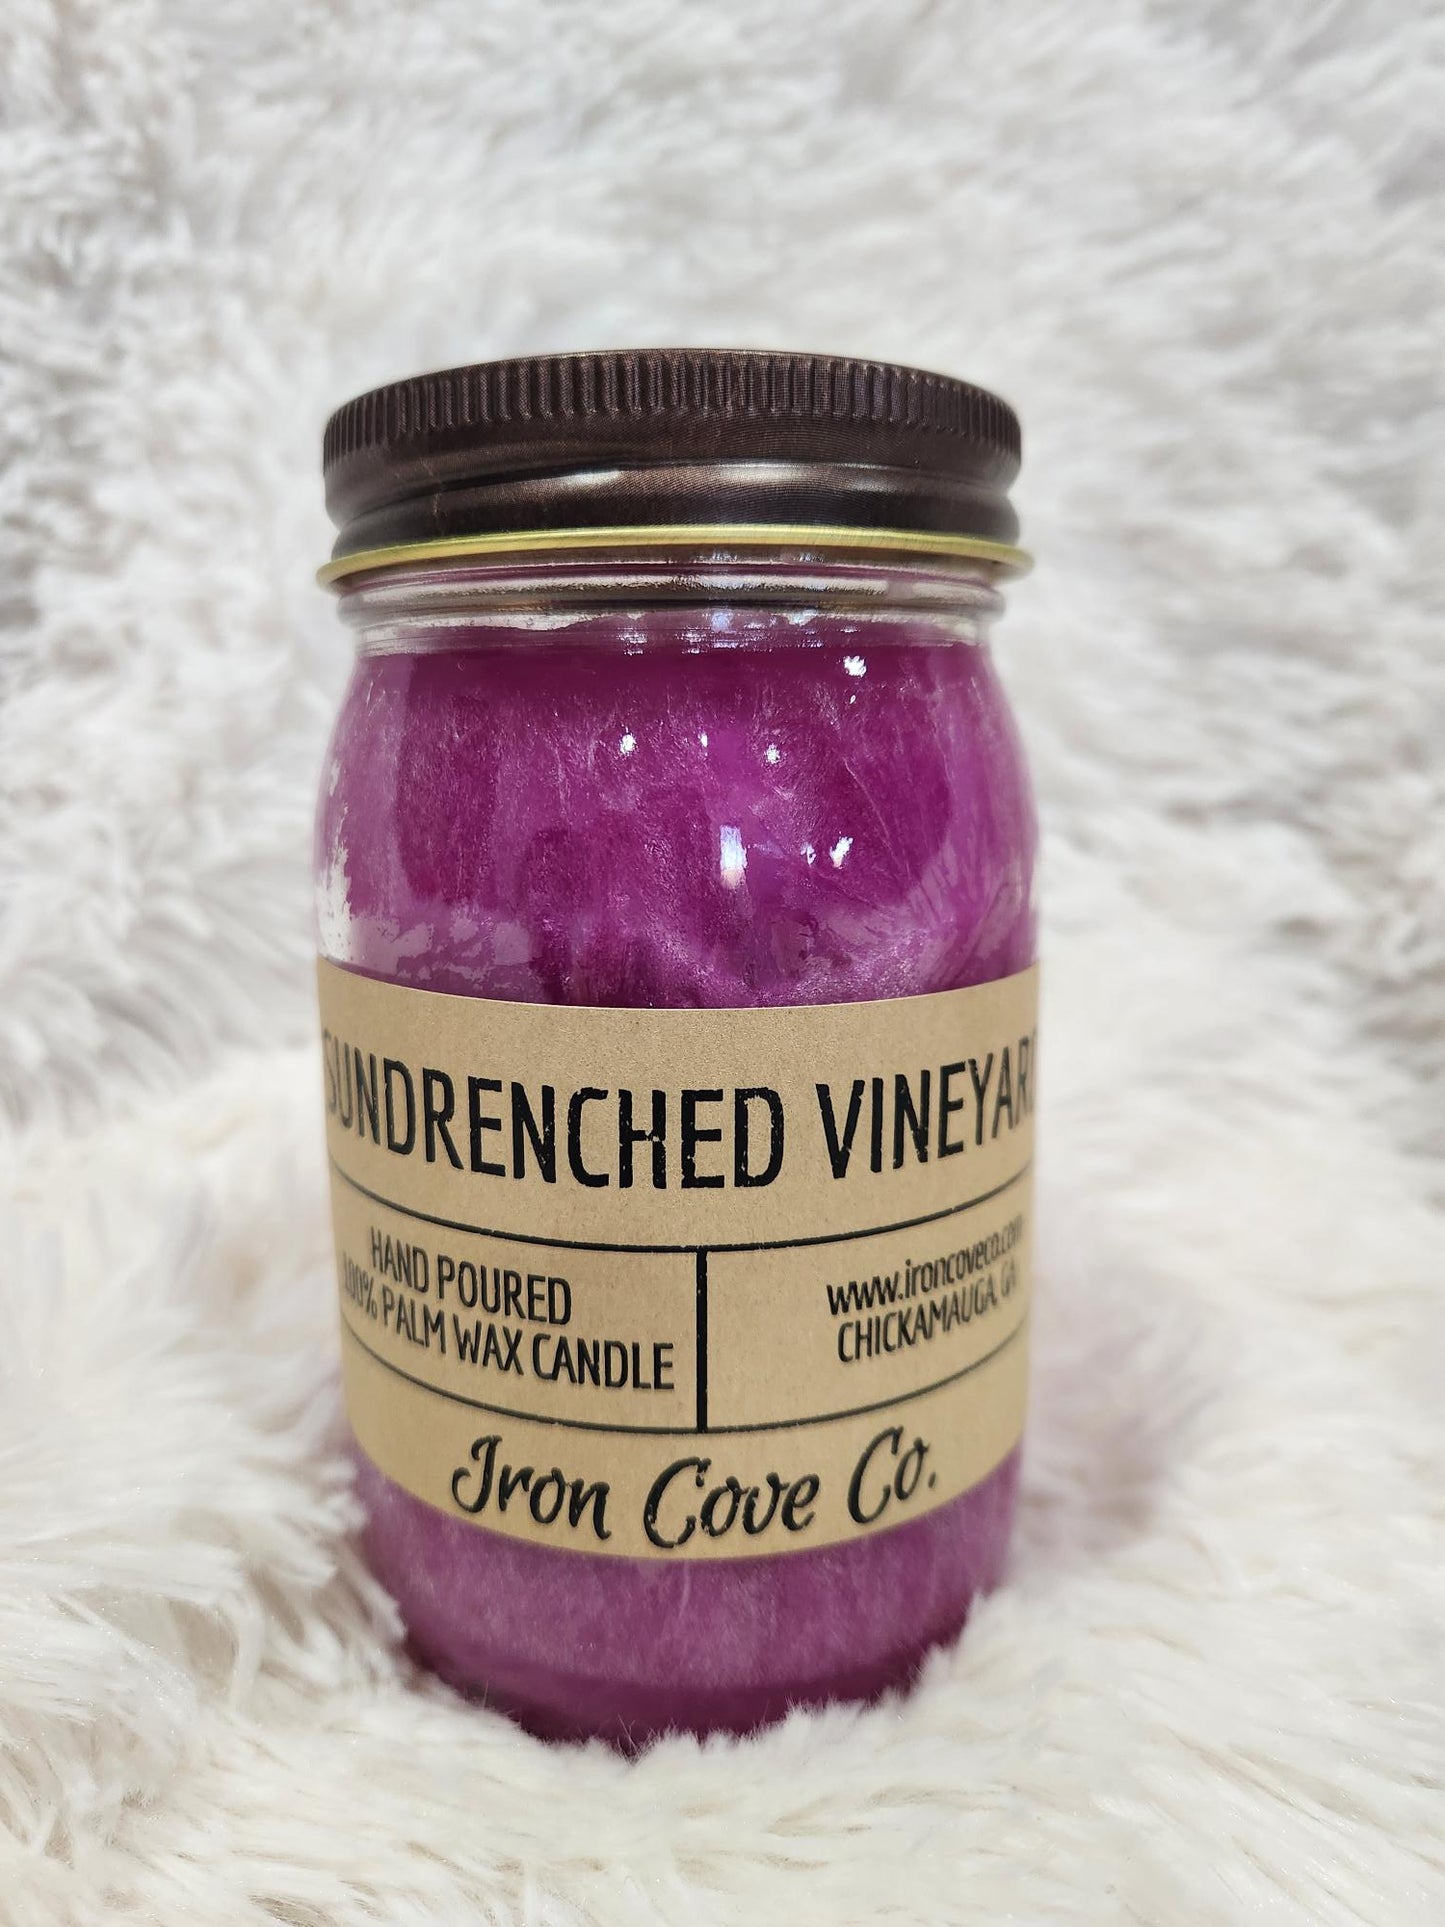 Sundrenched Vineyard Candle